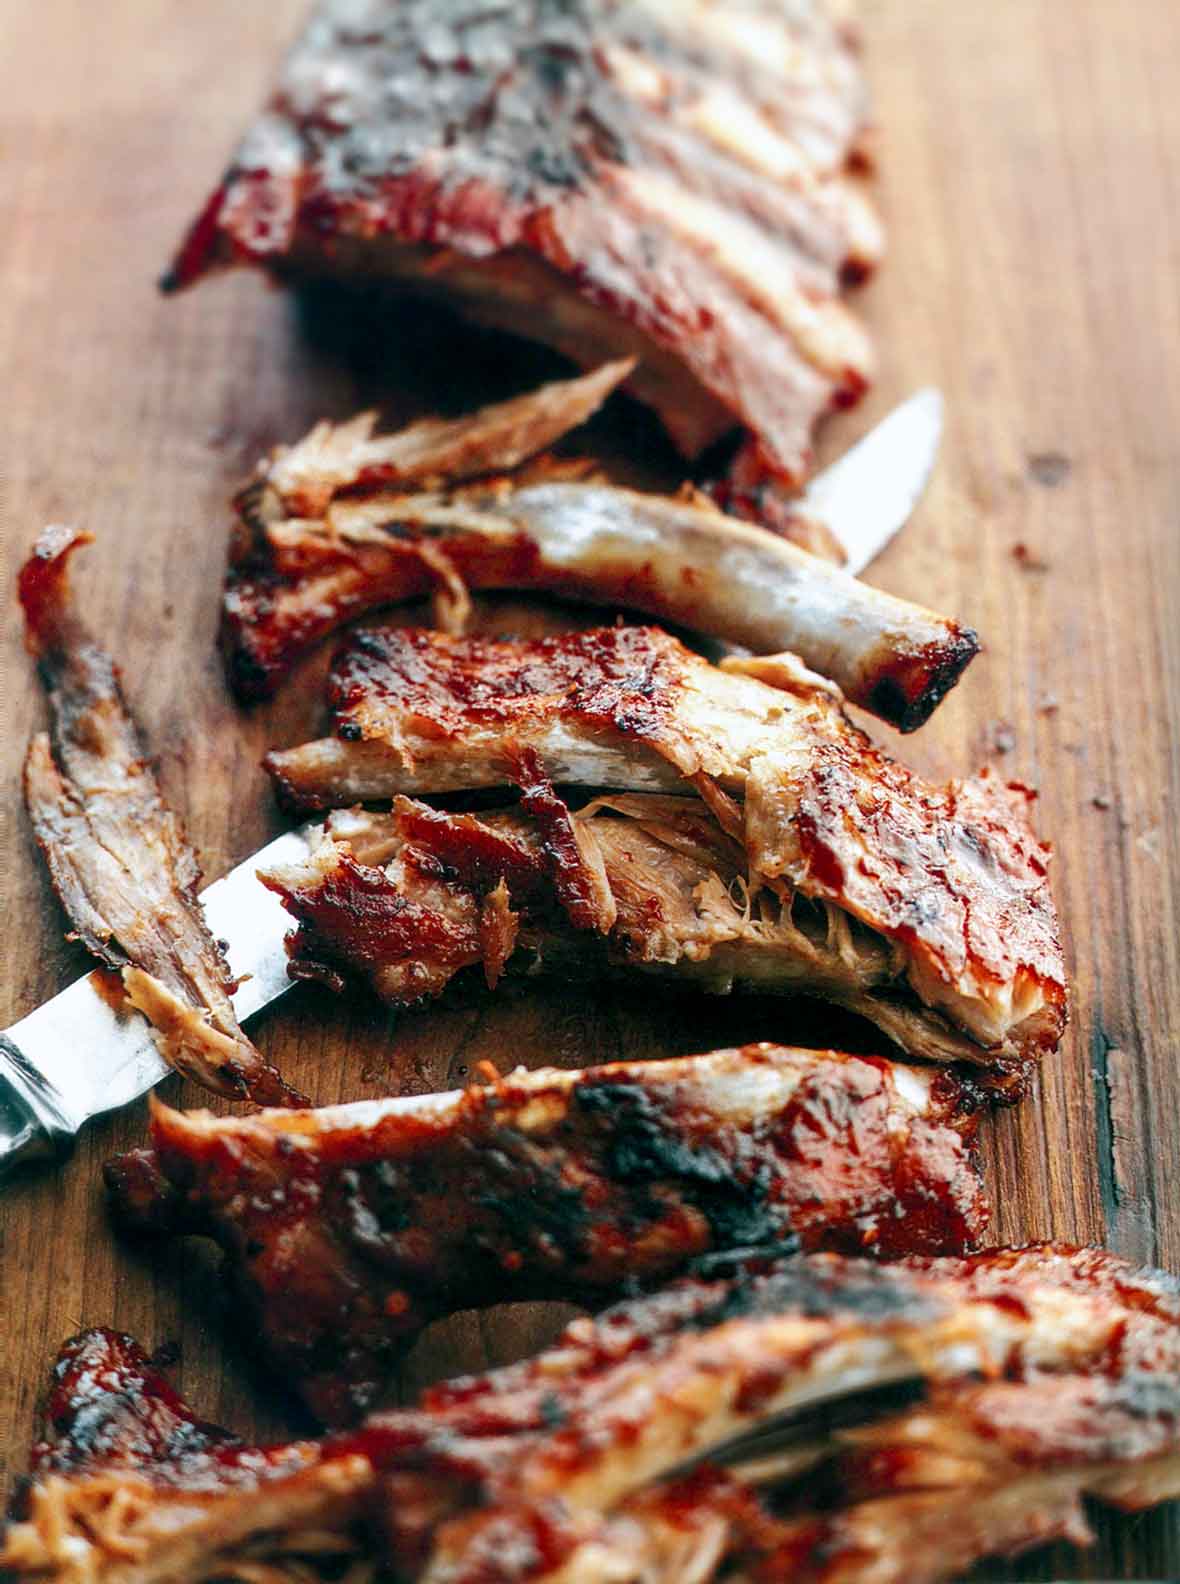 A slab of fall-off-the-bone baby back ribs with a knife cutting them into individual ribs.